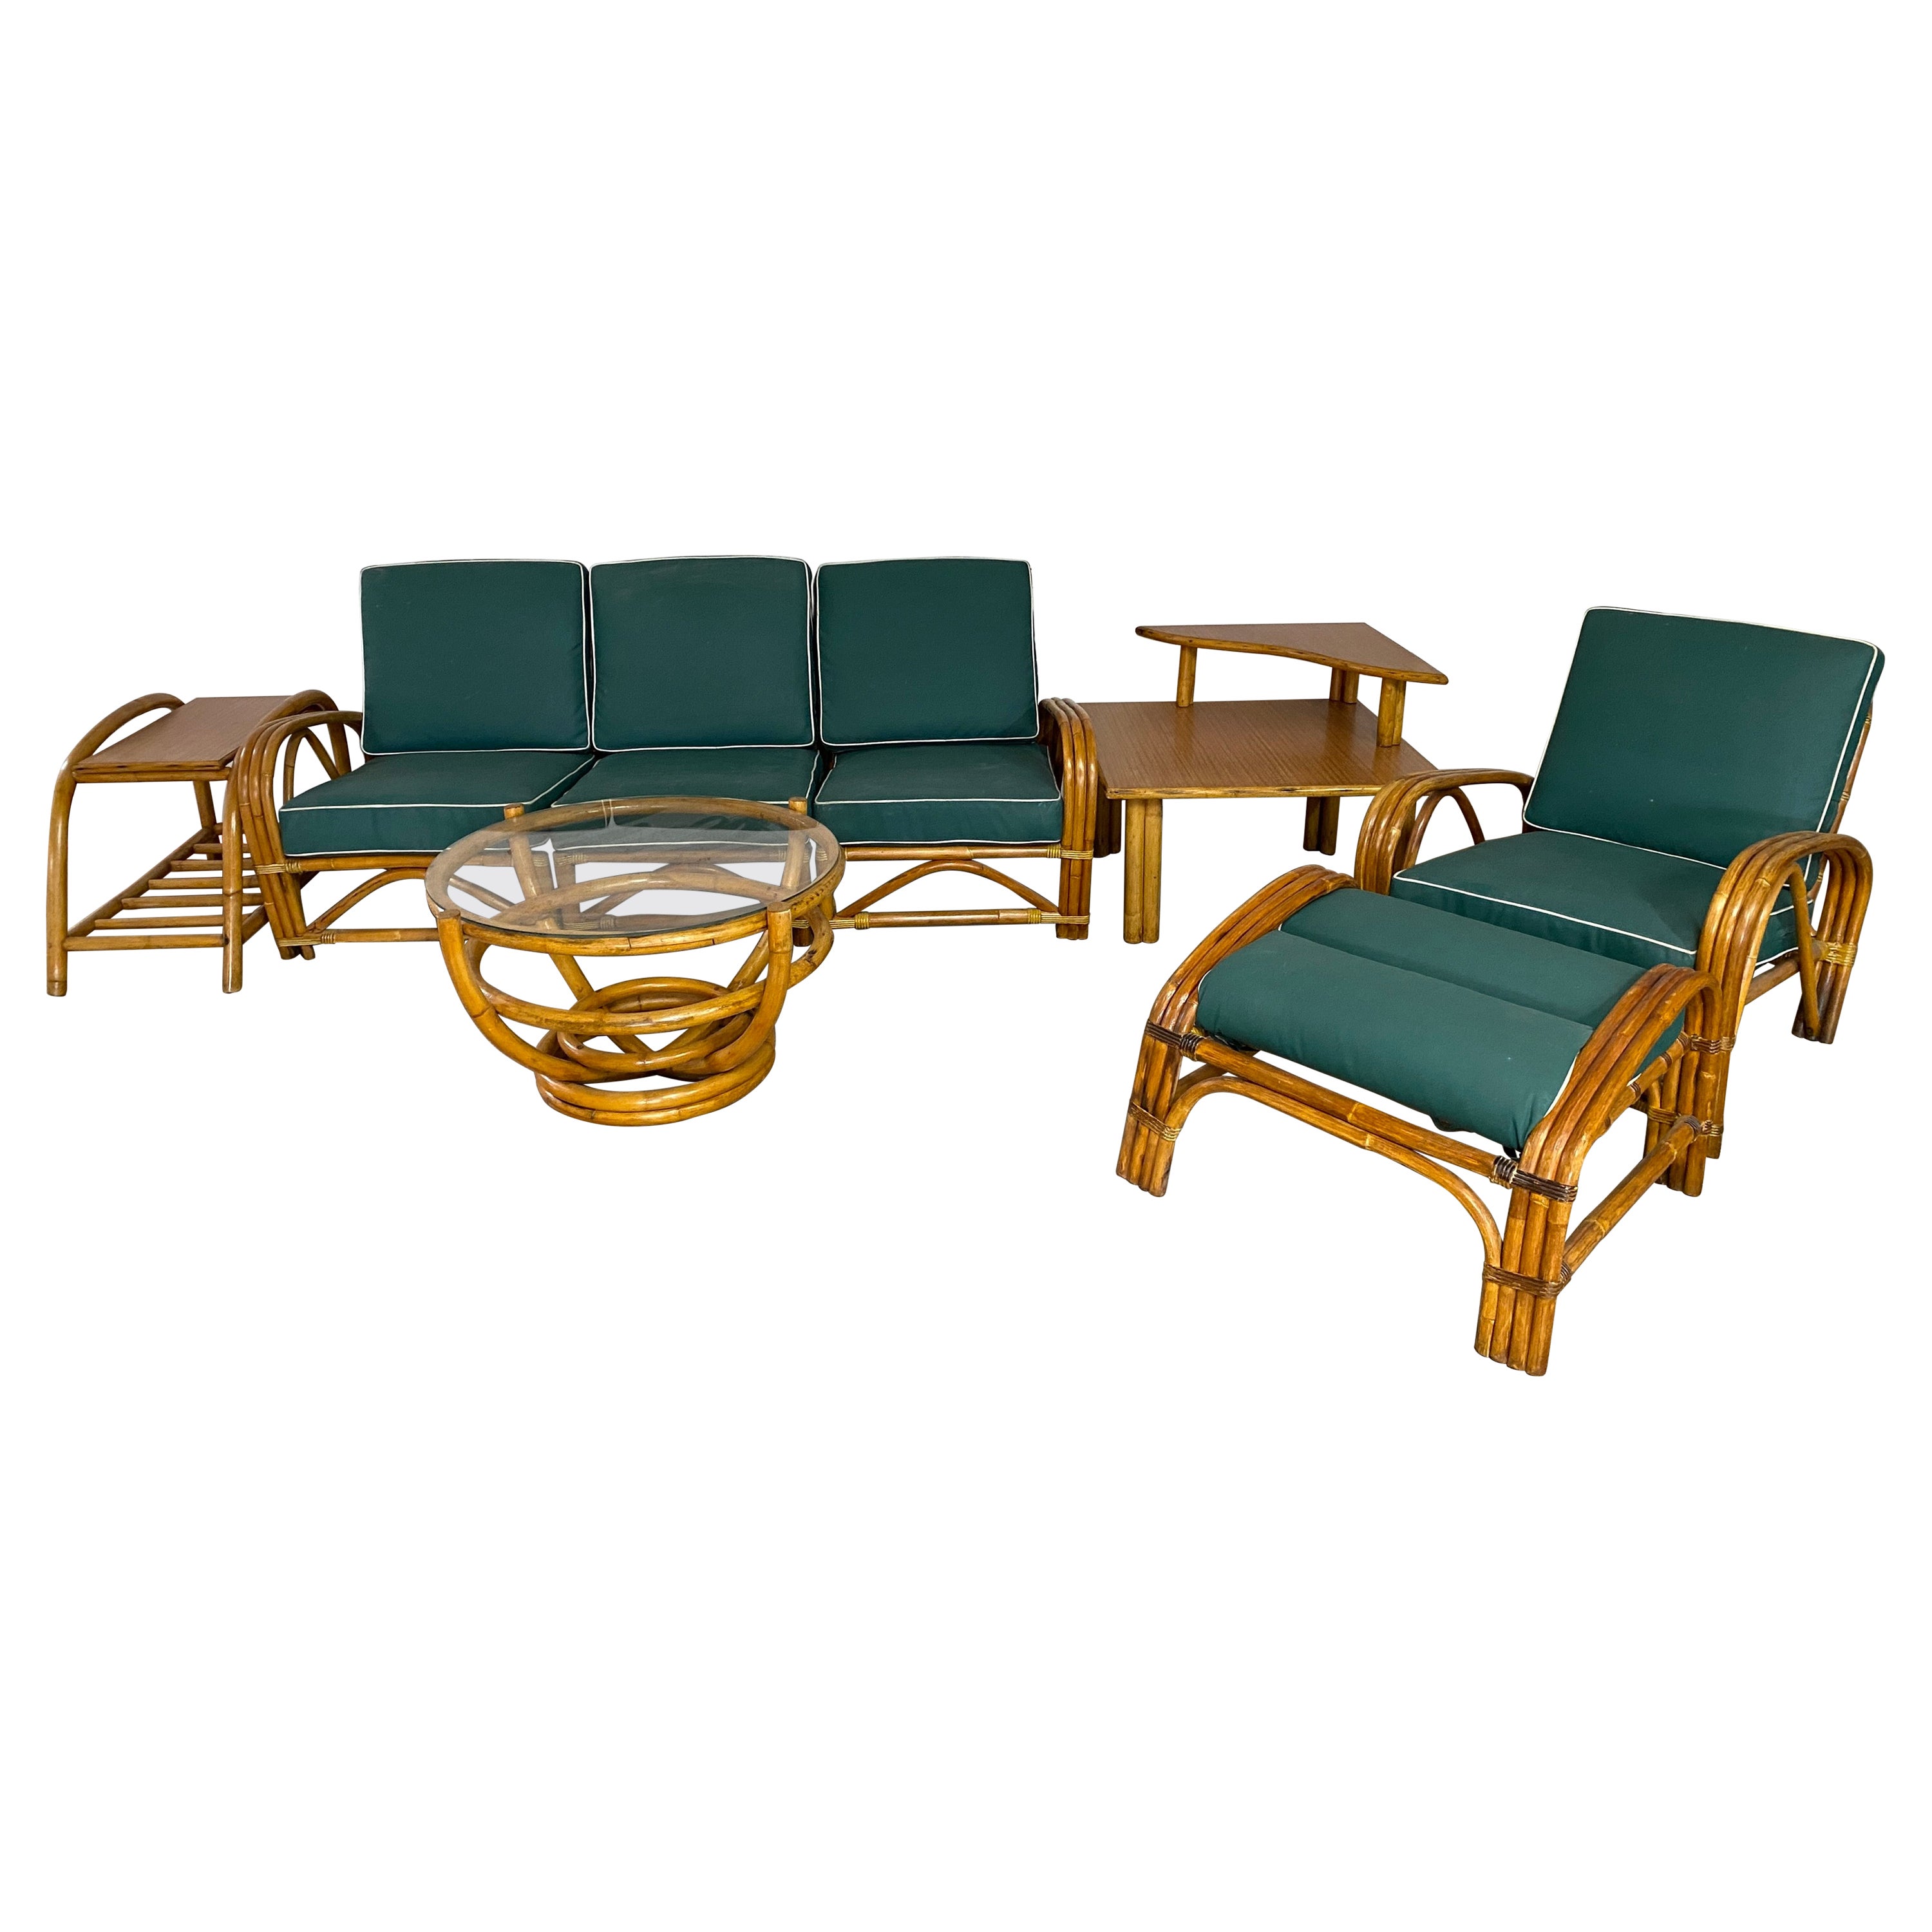 6 Piece Art Deco Bentwood Bamboo Wicker Seating Ensemble For Sale